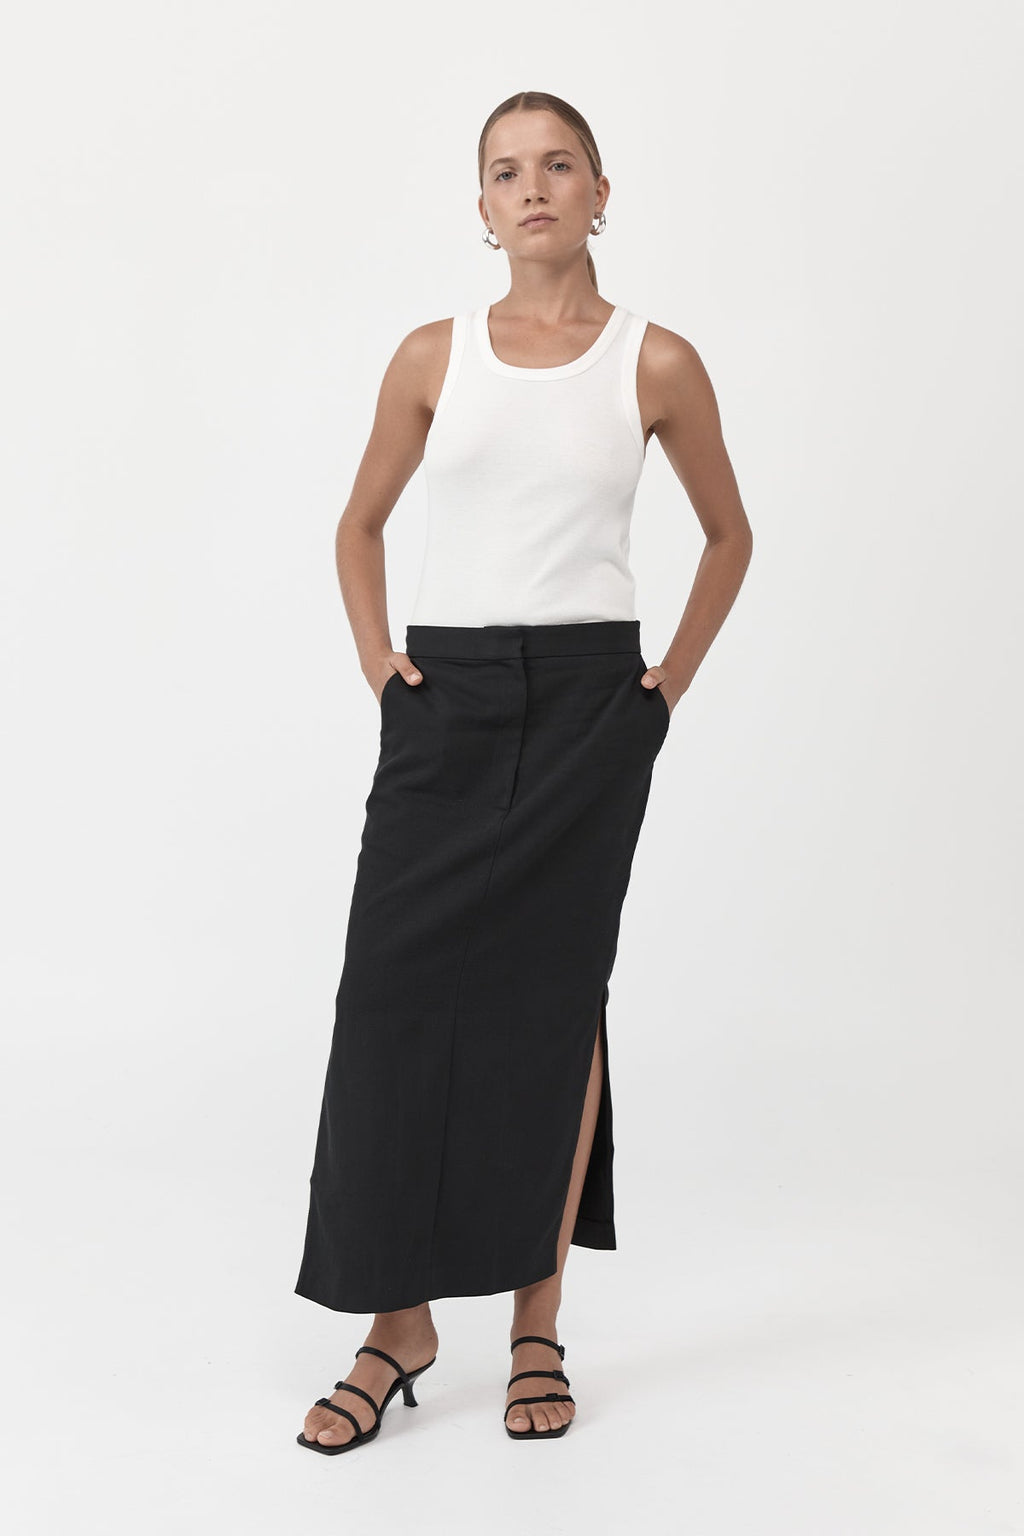 St. Agni  Low waisted Tailored Skirt - Black